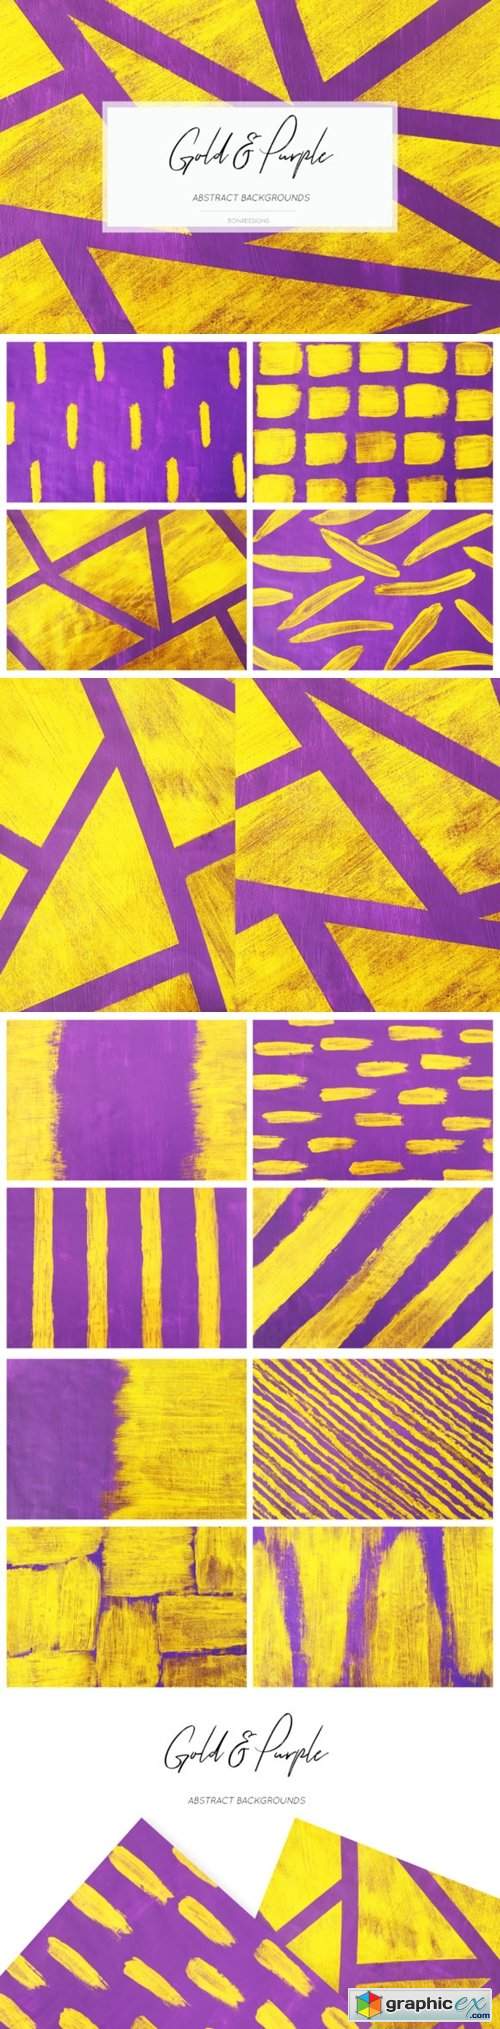 Gold Purple Backgrounds